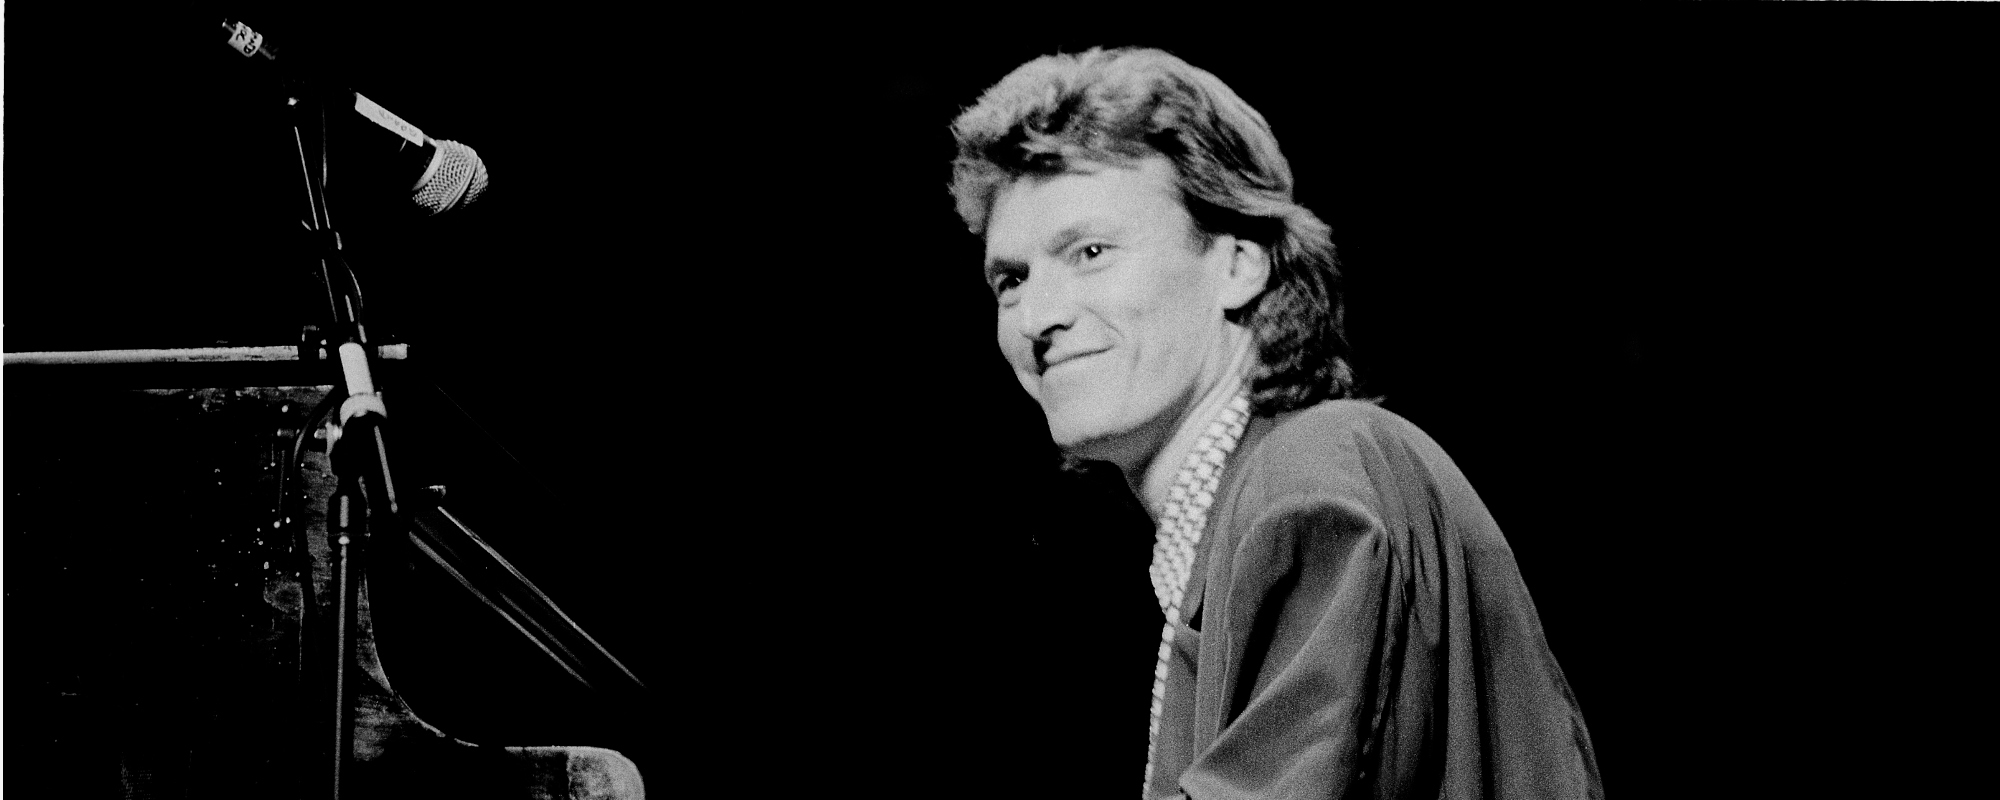 The More Divine Meaning Behind “Higher Love” by Steve Winwood